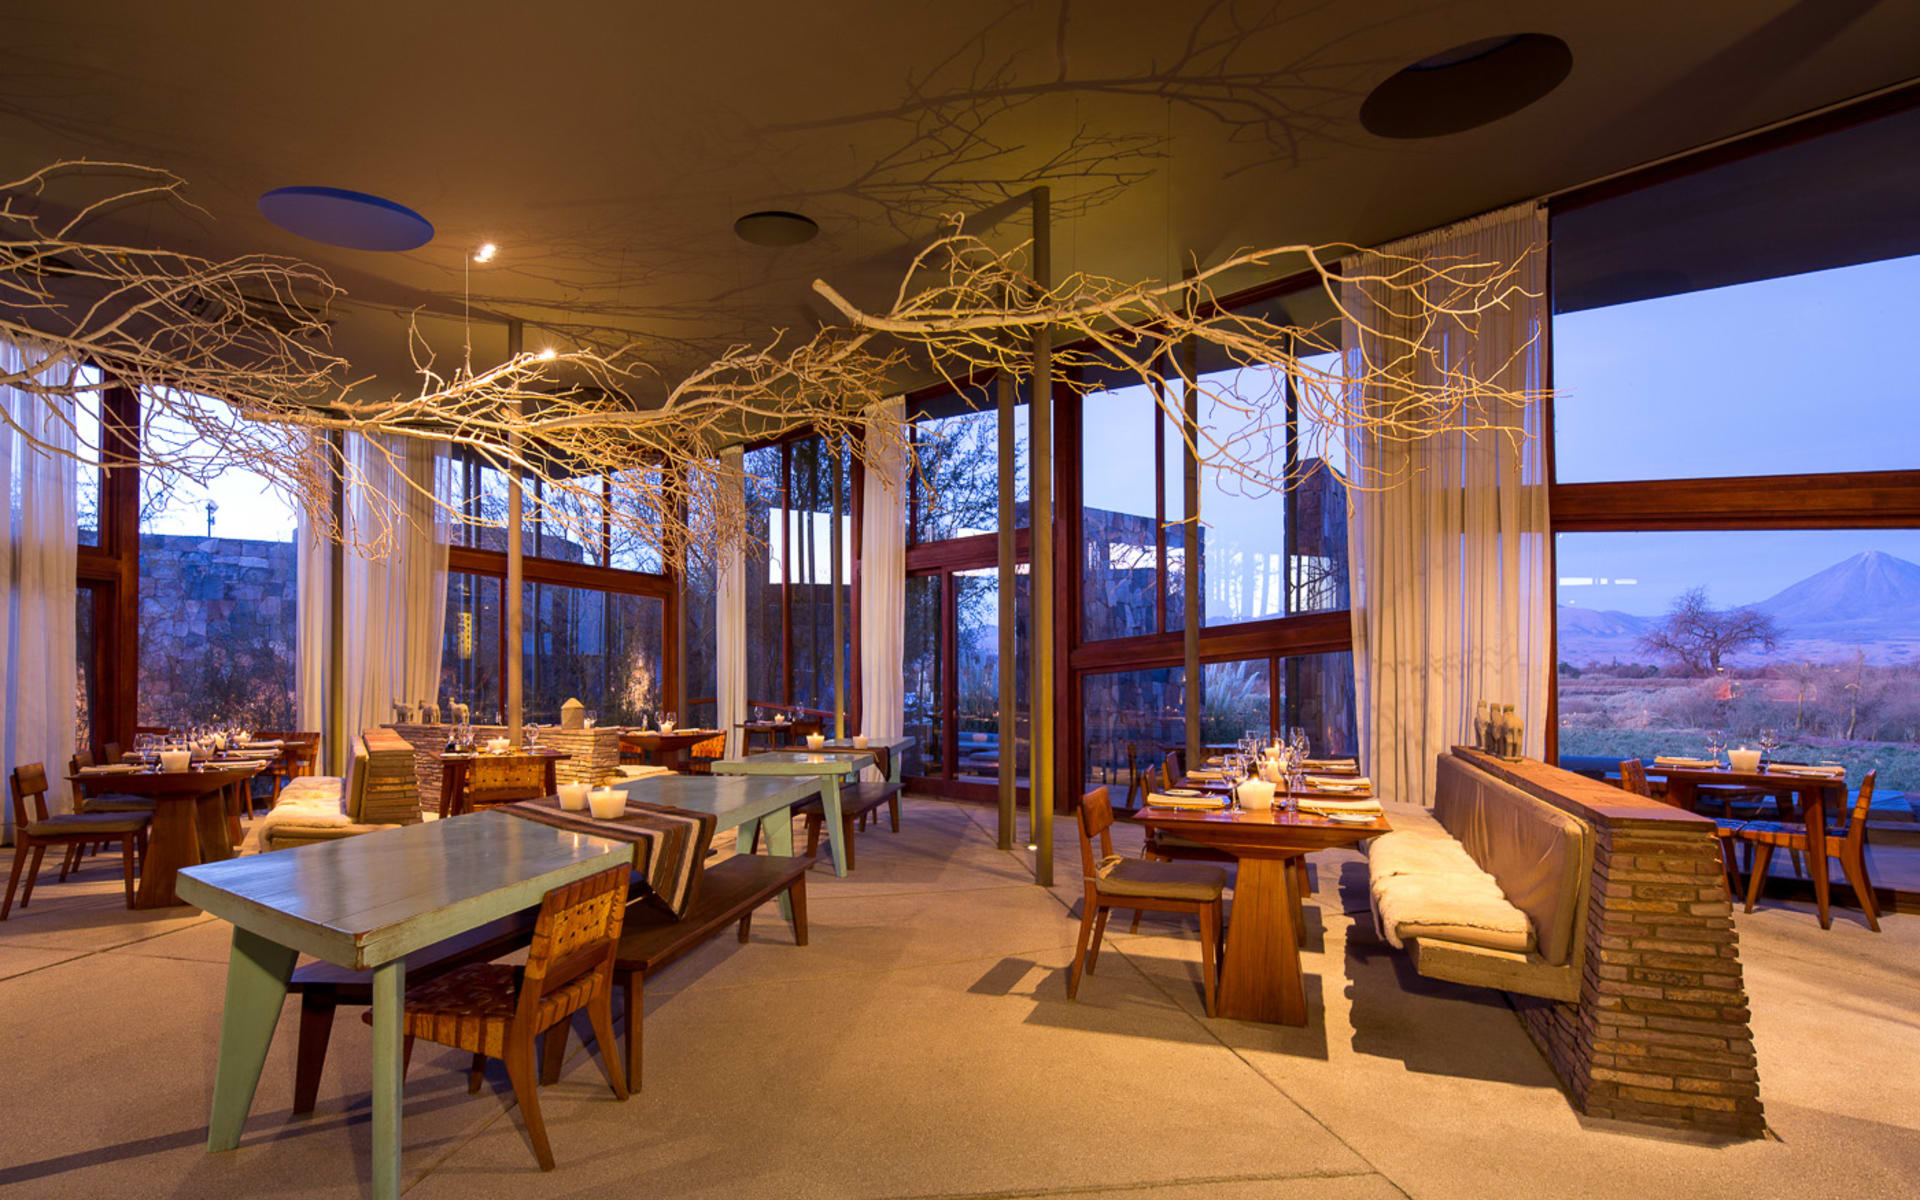 The restaurant at Tierra Atacama has floor-to-ceiling windows and wooden tables that match its earthy exterior.